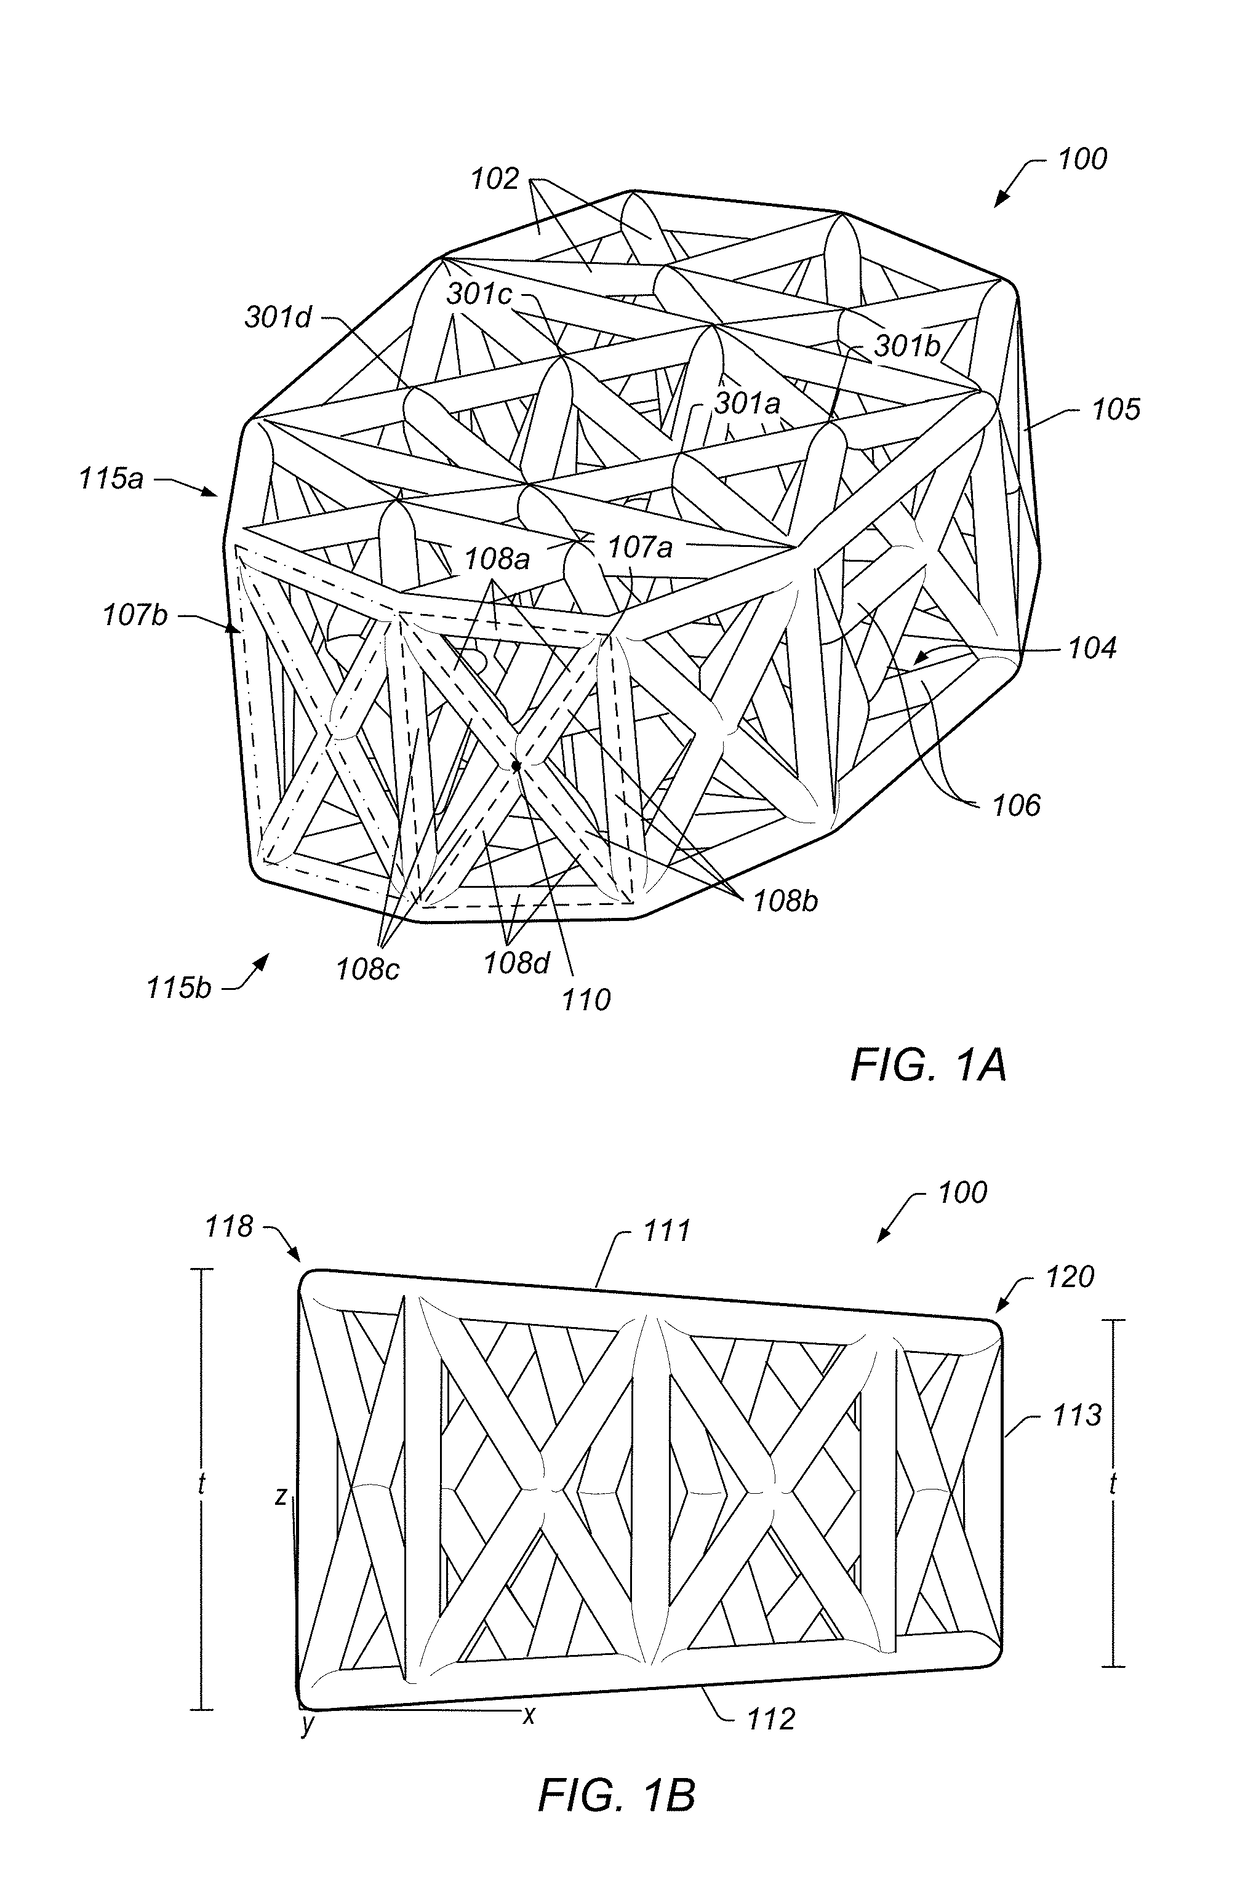 Motion preservation implant and methods